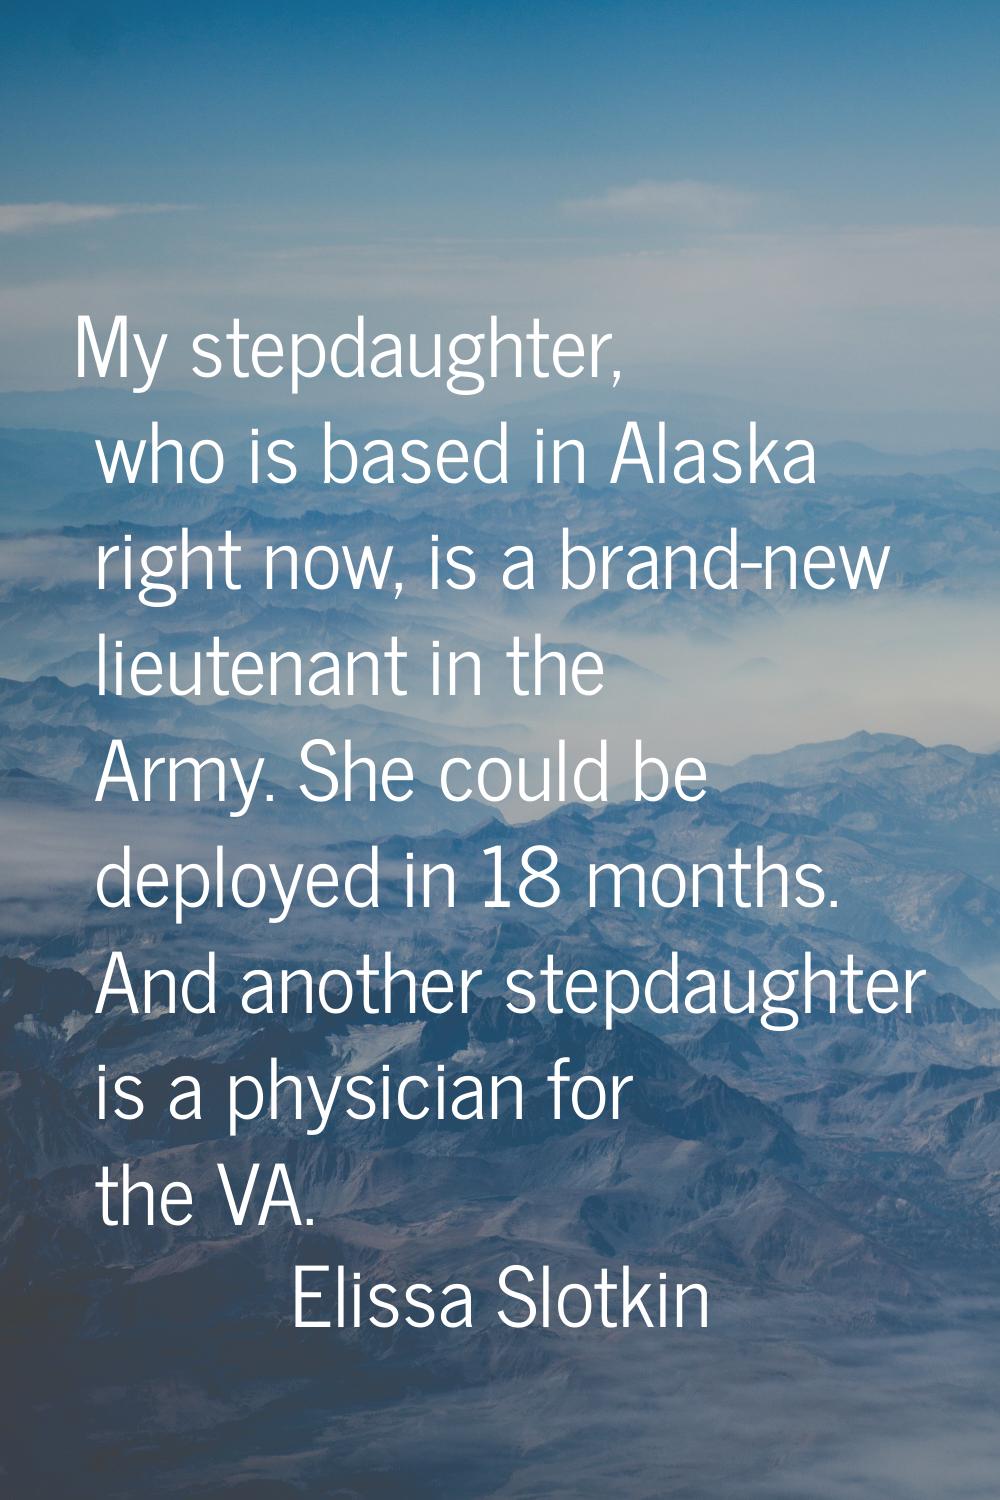 My stepdaughter, who is based in Alaska right now, is a brand-new lieutenant in the Army. She could